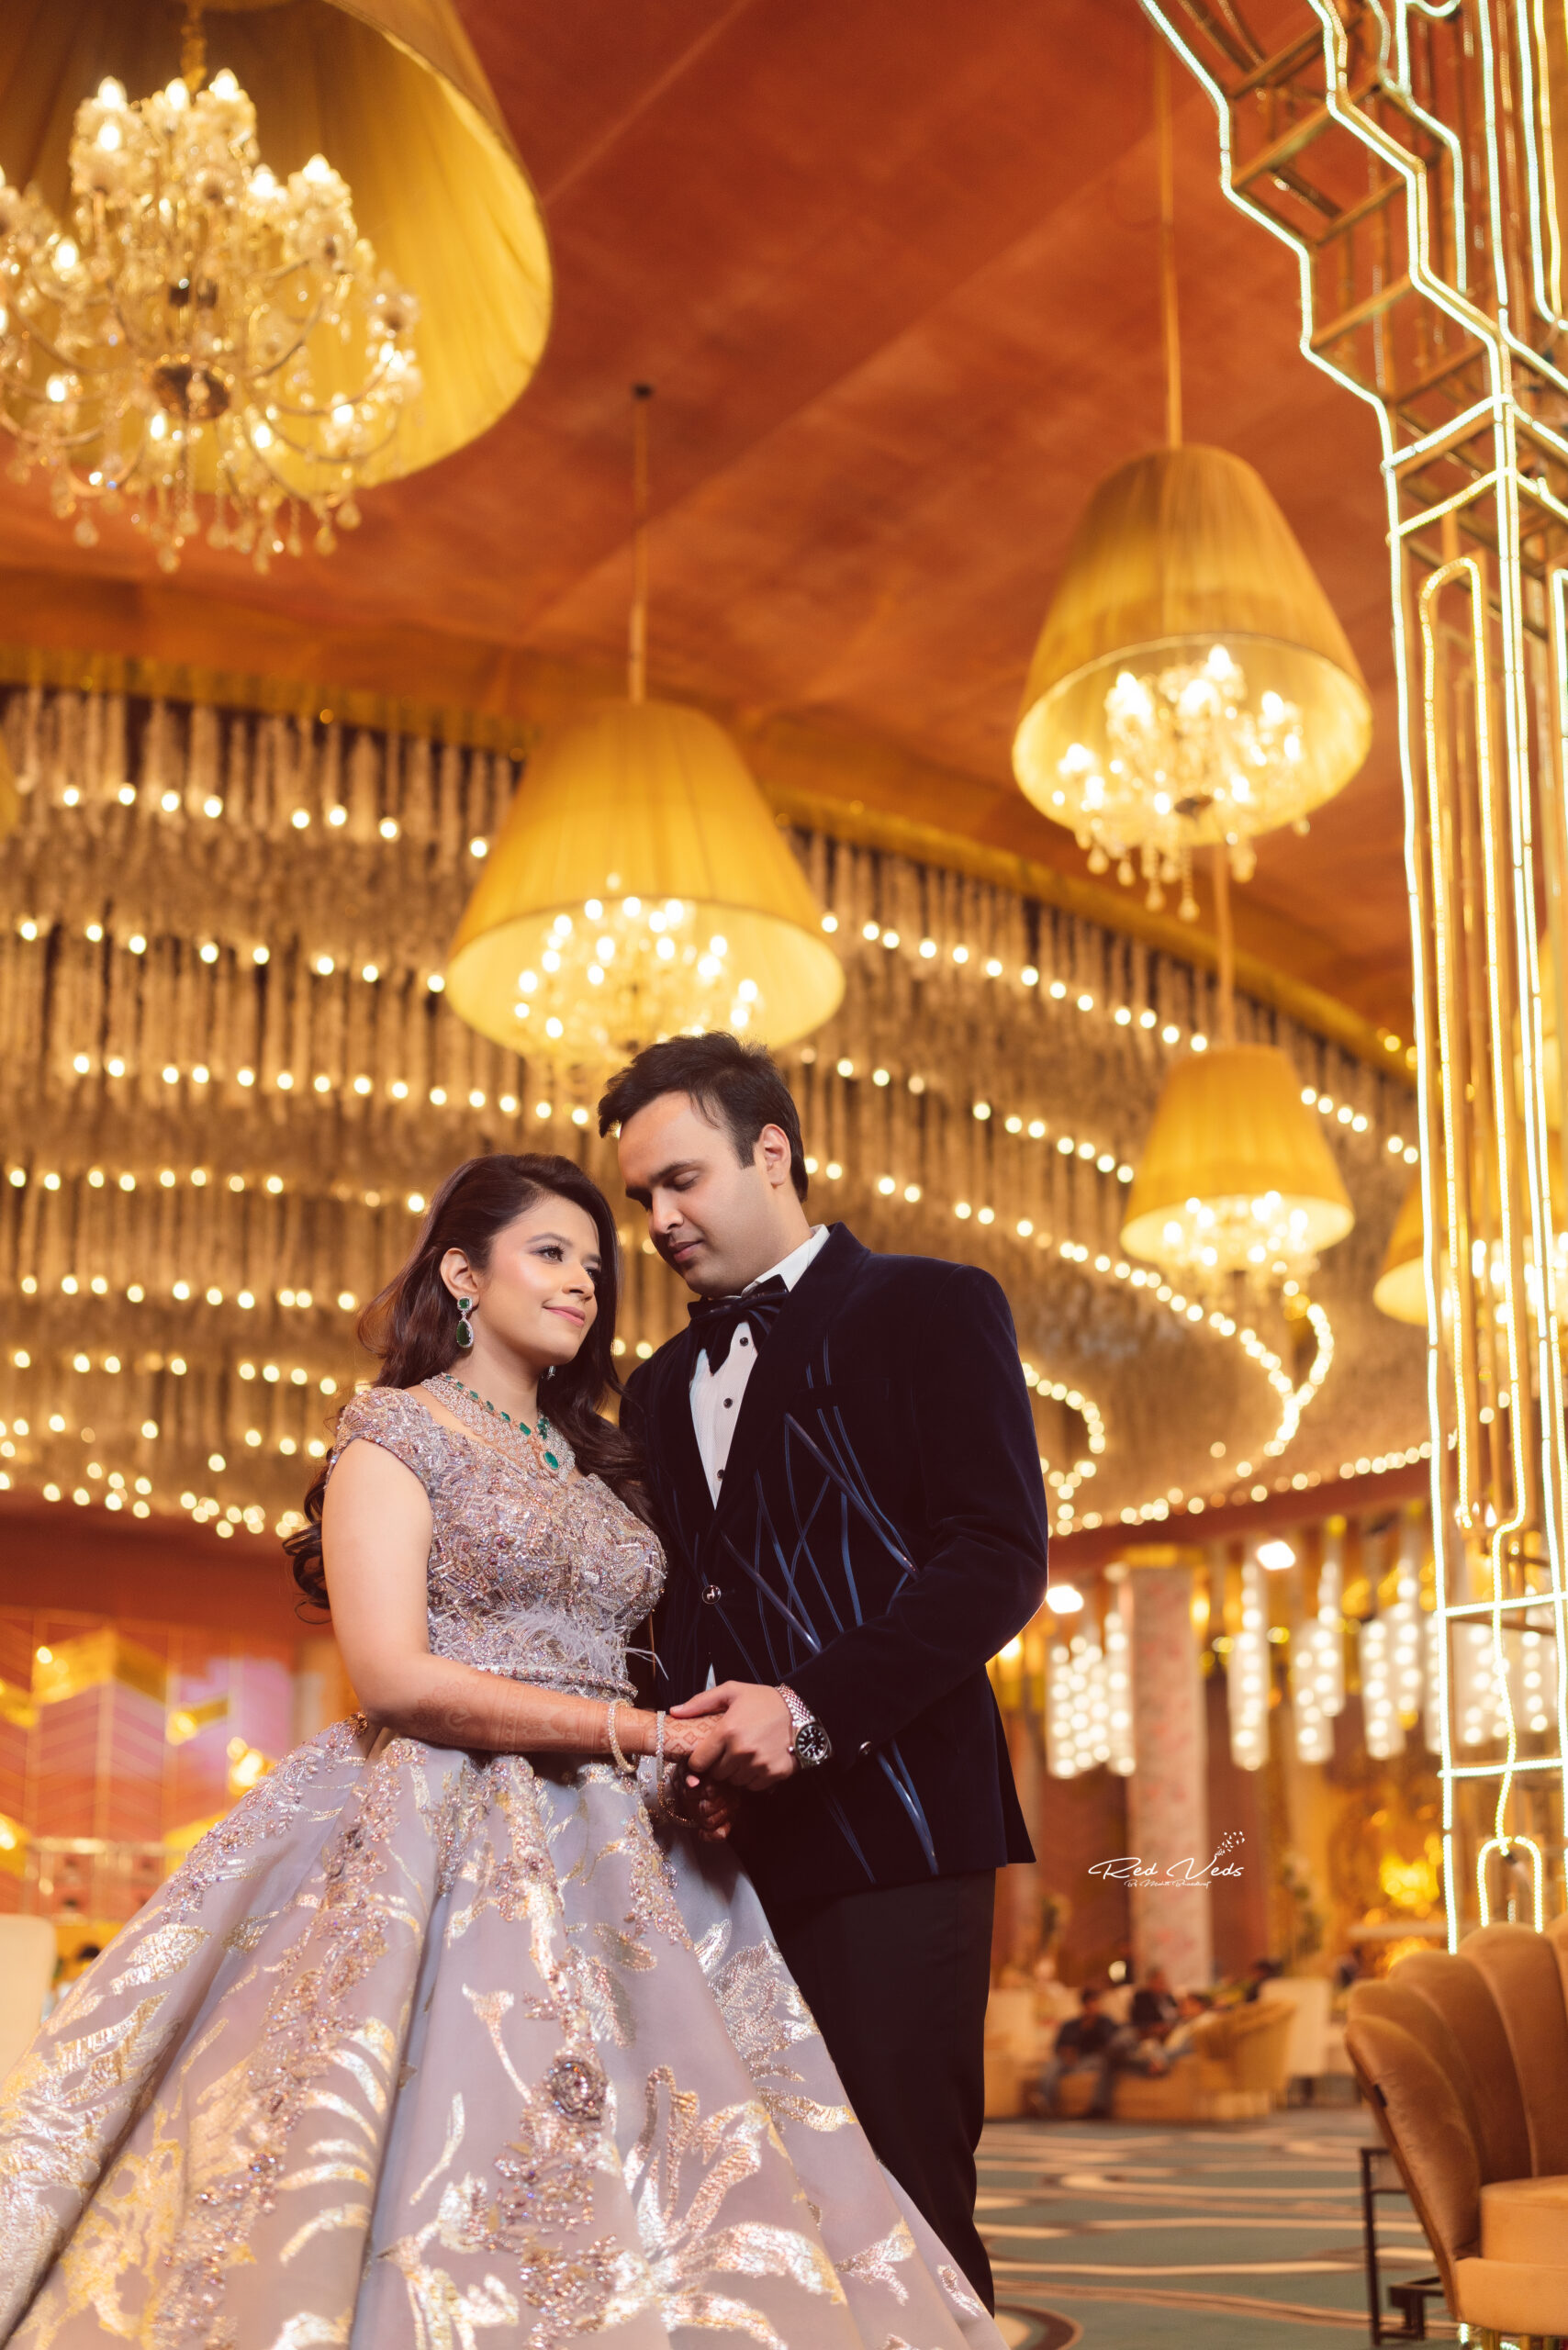 Wedding photography Poses India | How to Pose for Wedding Photos Tips